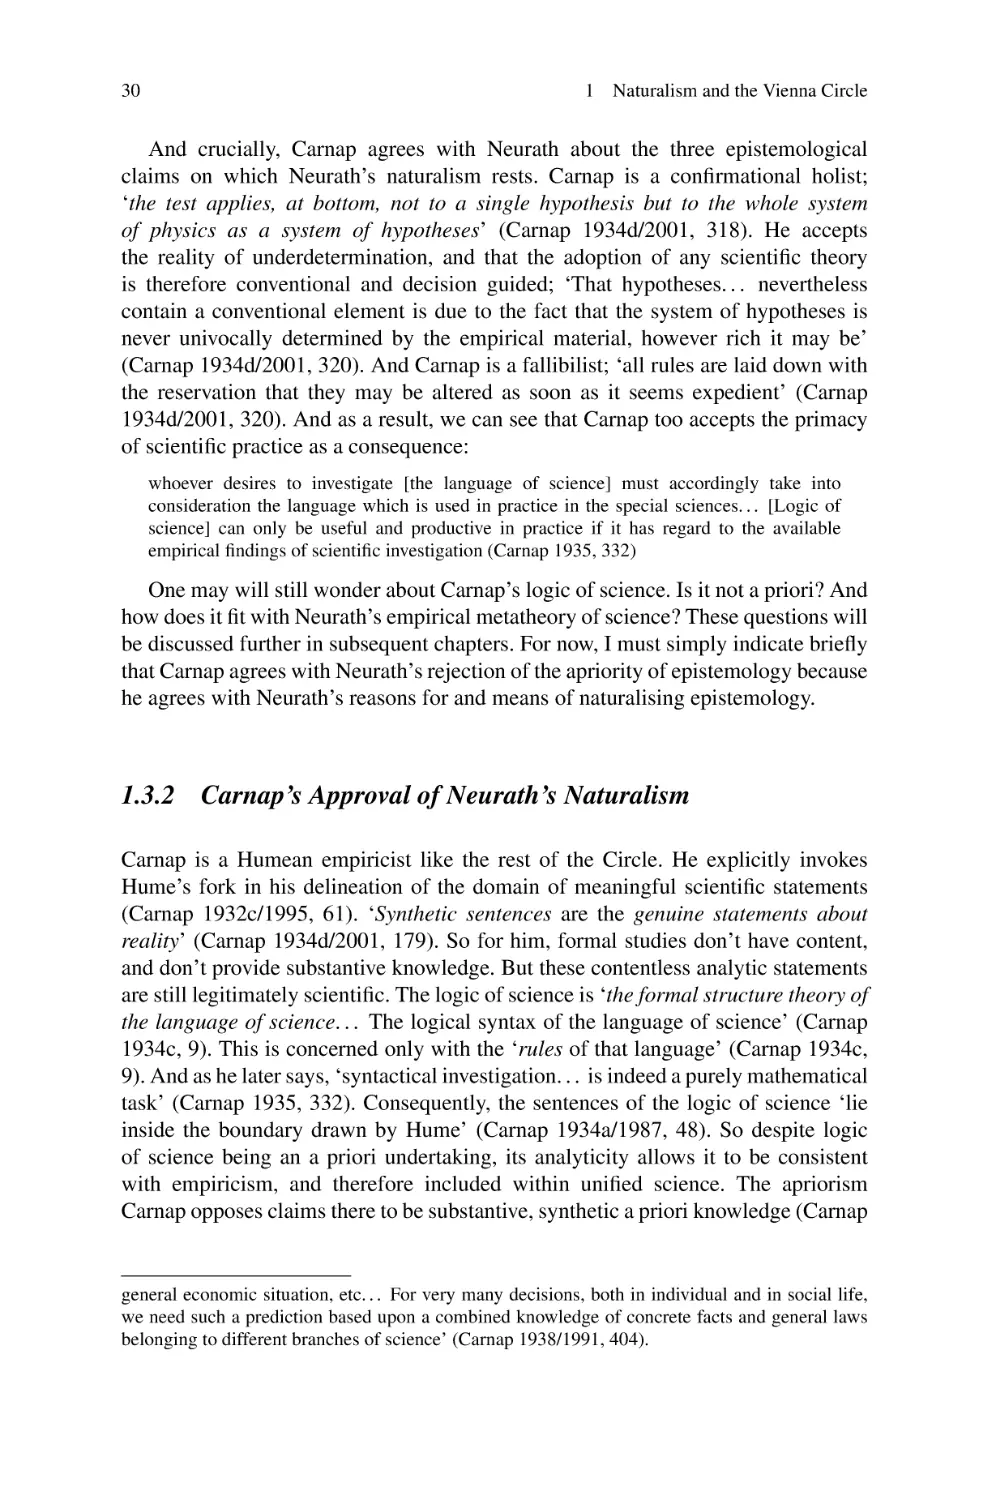 1.3.2 Carnap's Approval of Neurath's Naturalism